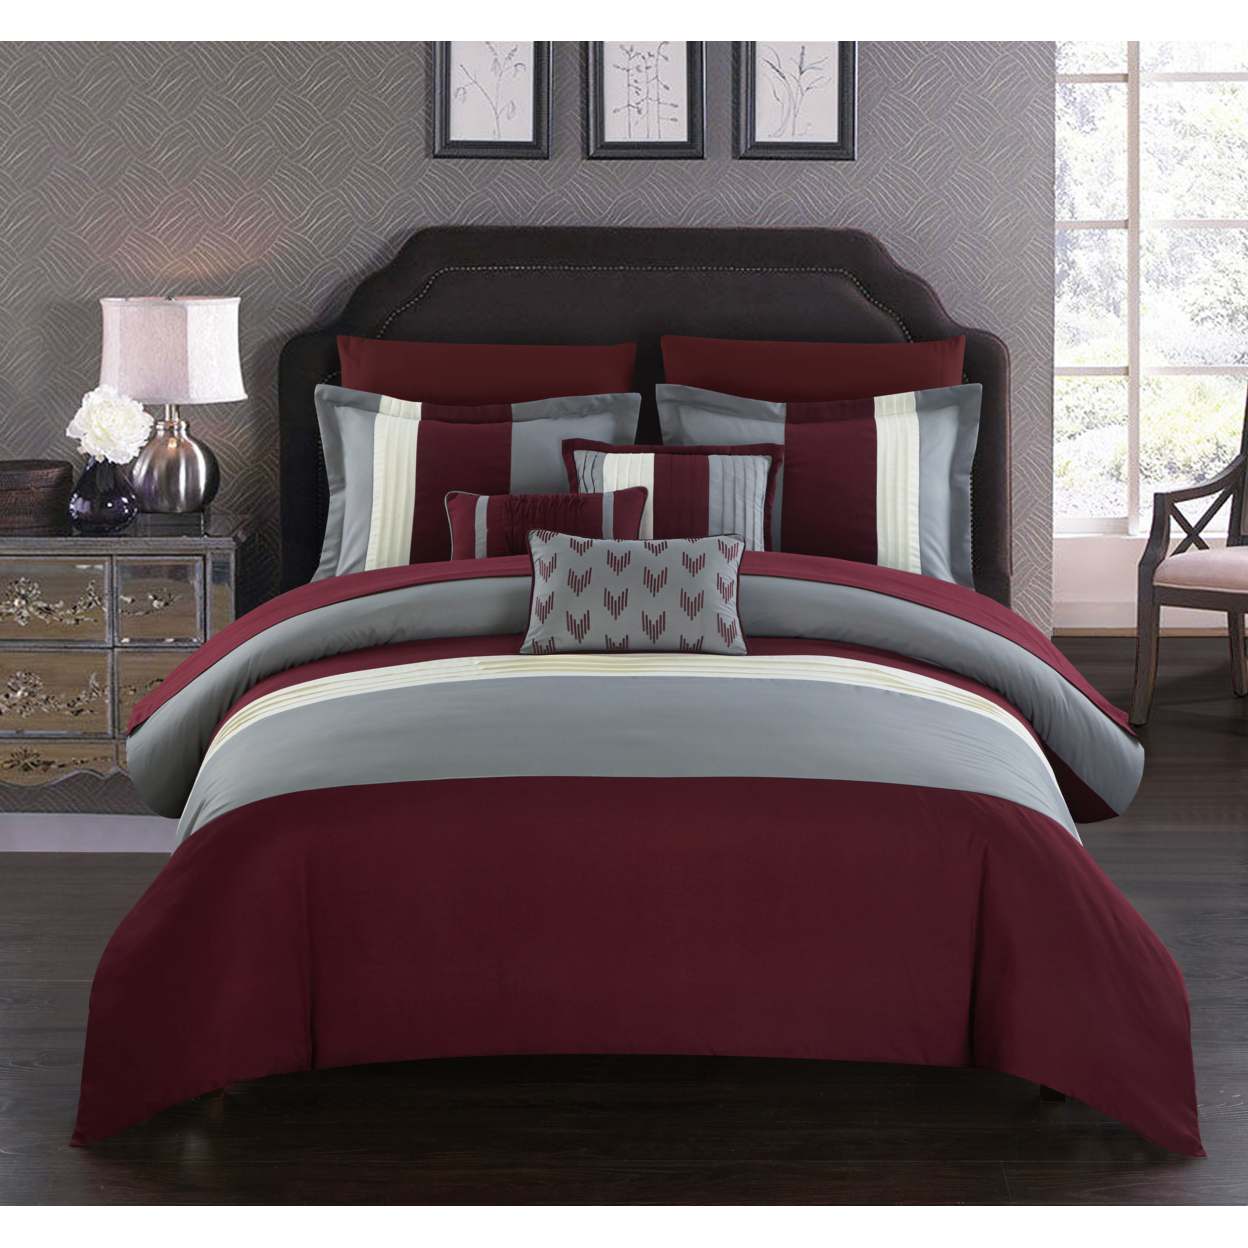 Rashi 10 Or 8 Piece Color Block Bed In A Bag Bedding And Comforter Set - Plum, King